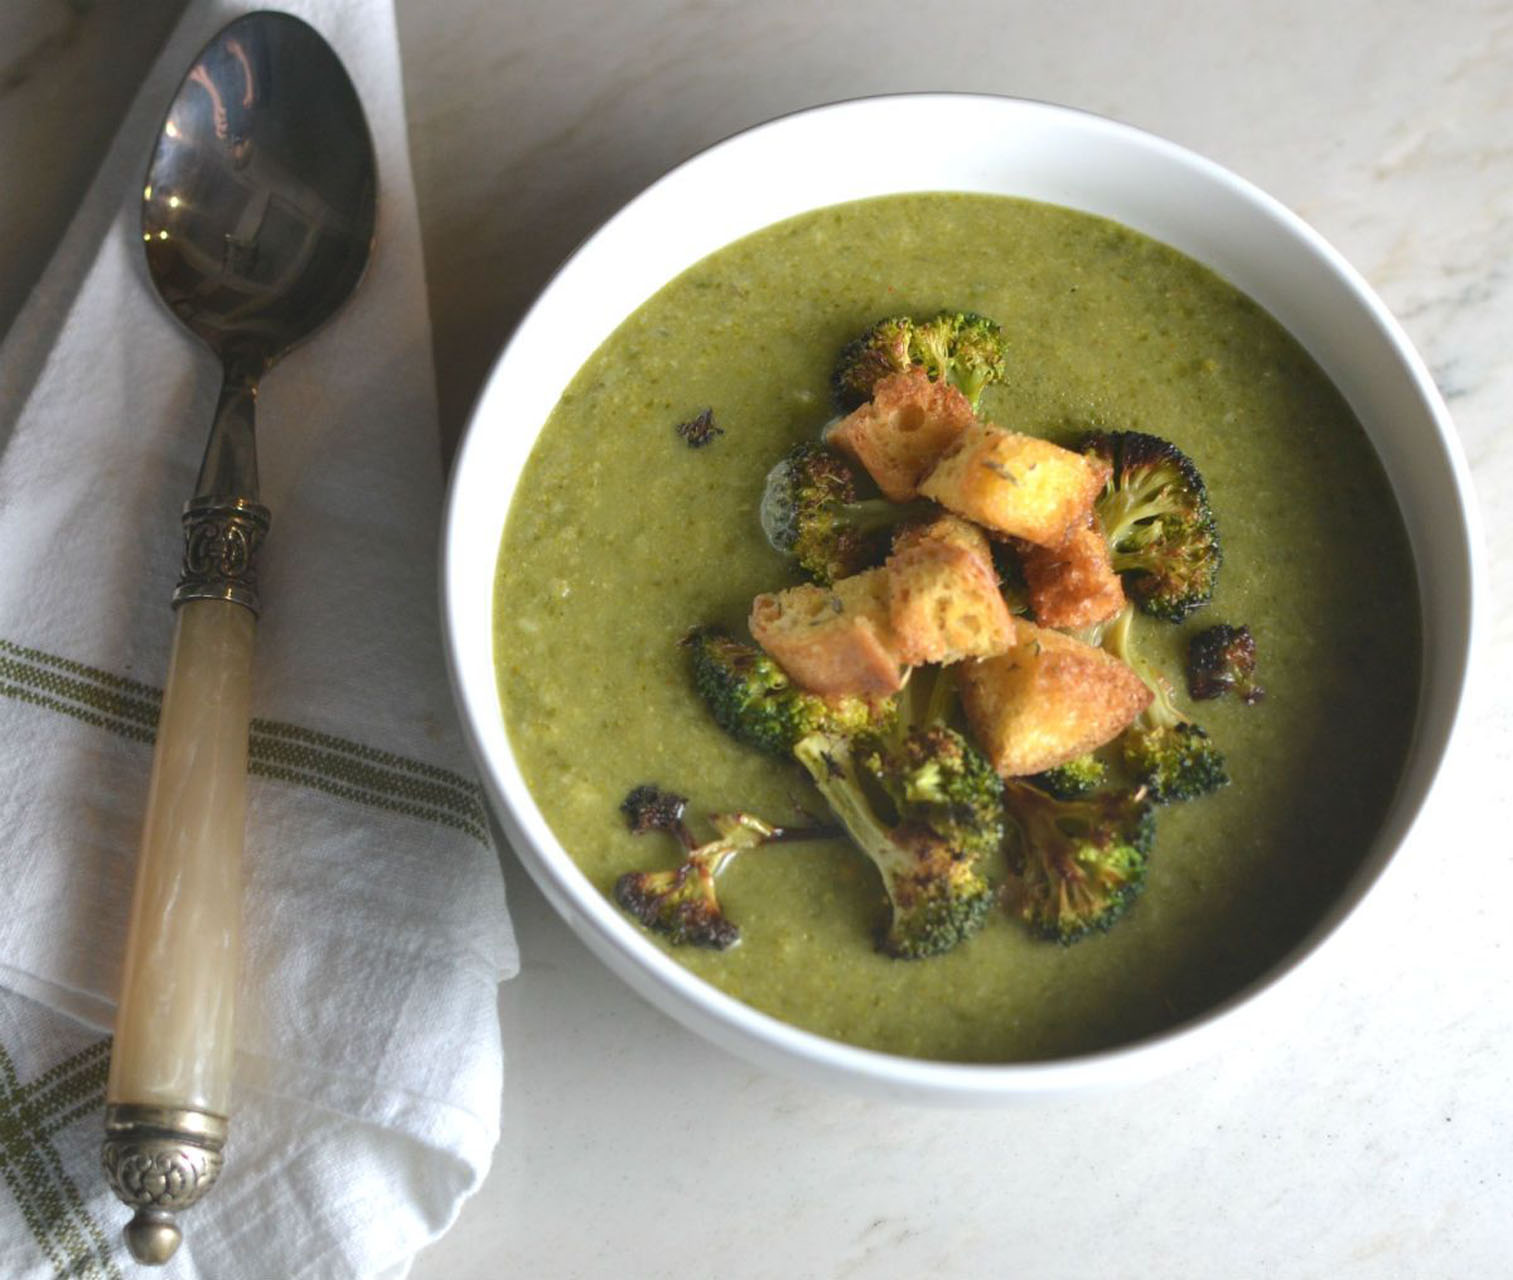 bowl of broccoli soup with crispy croutons on top